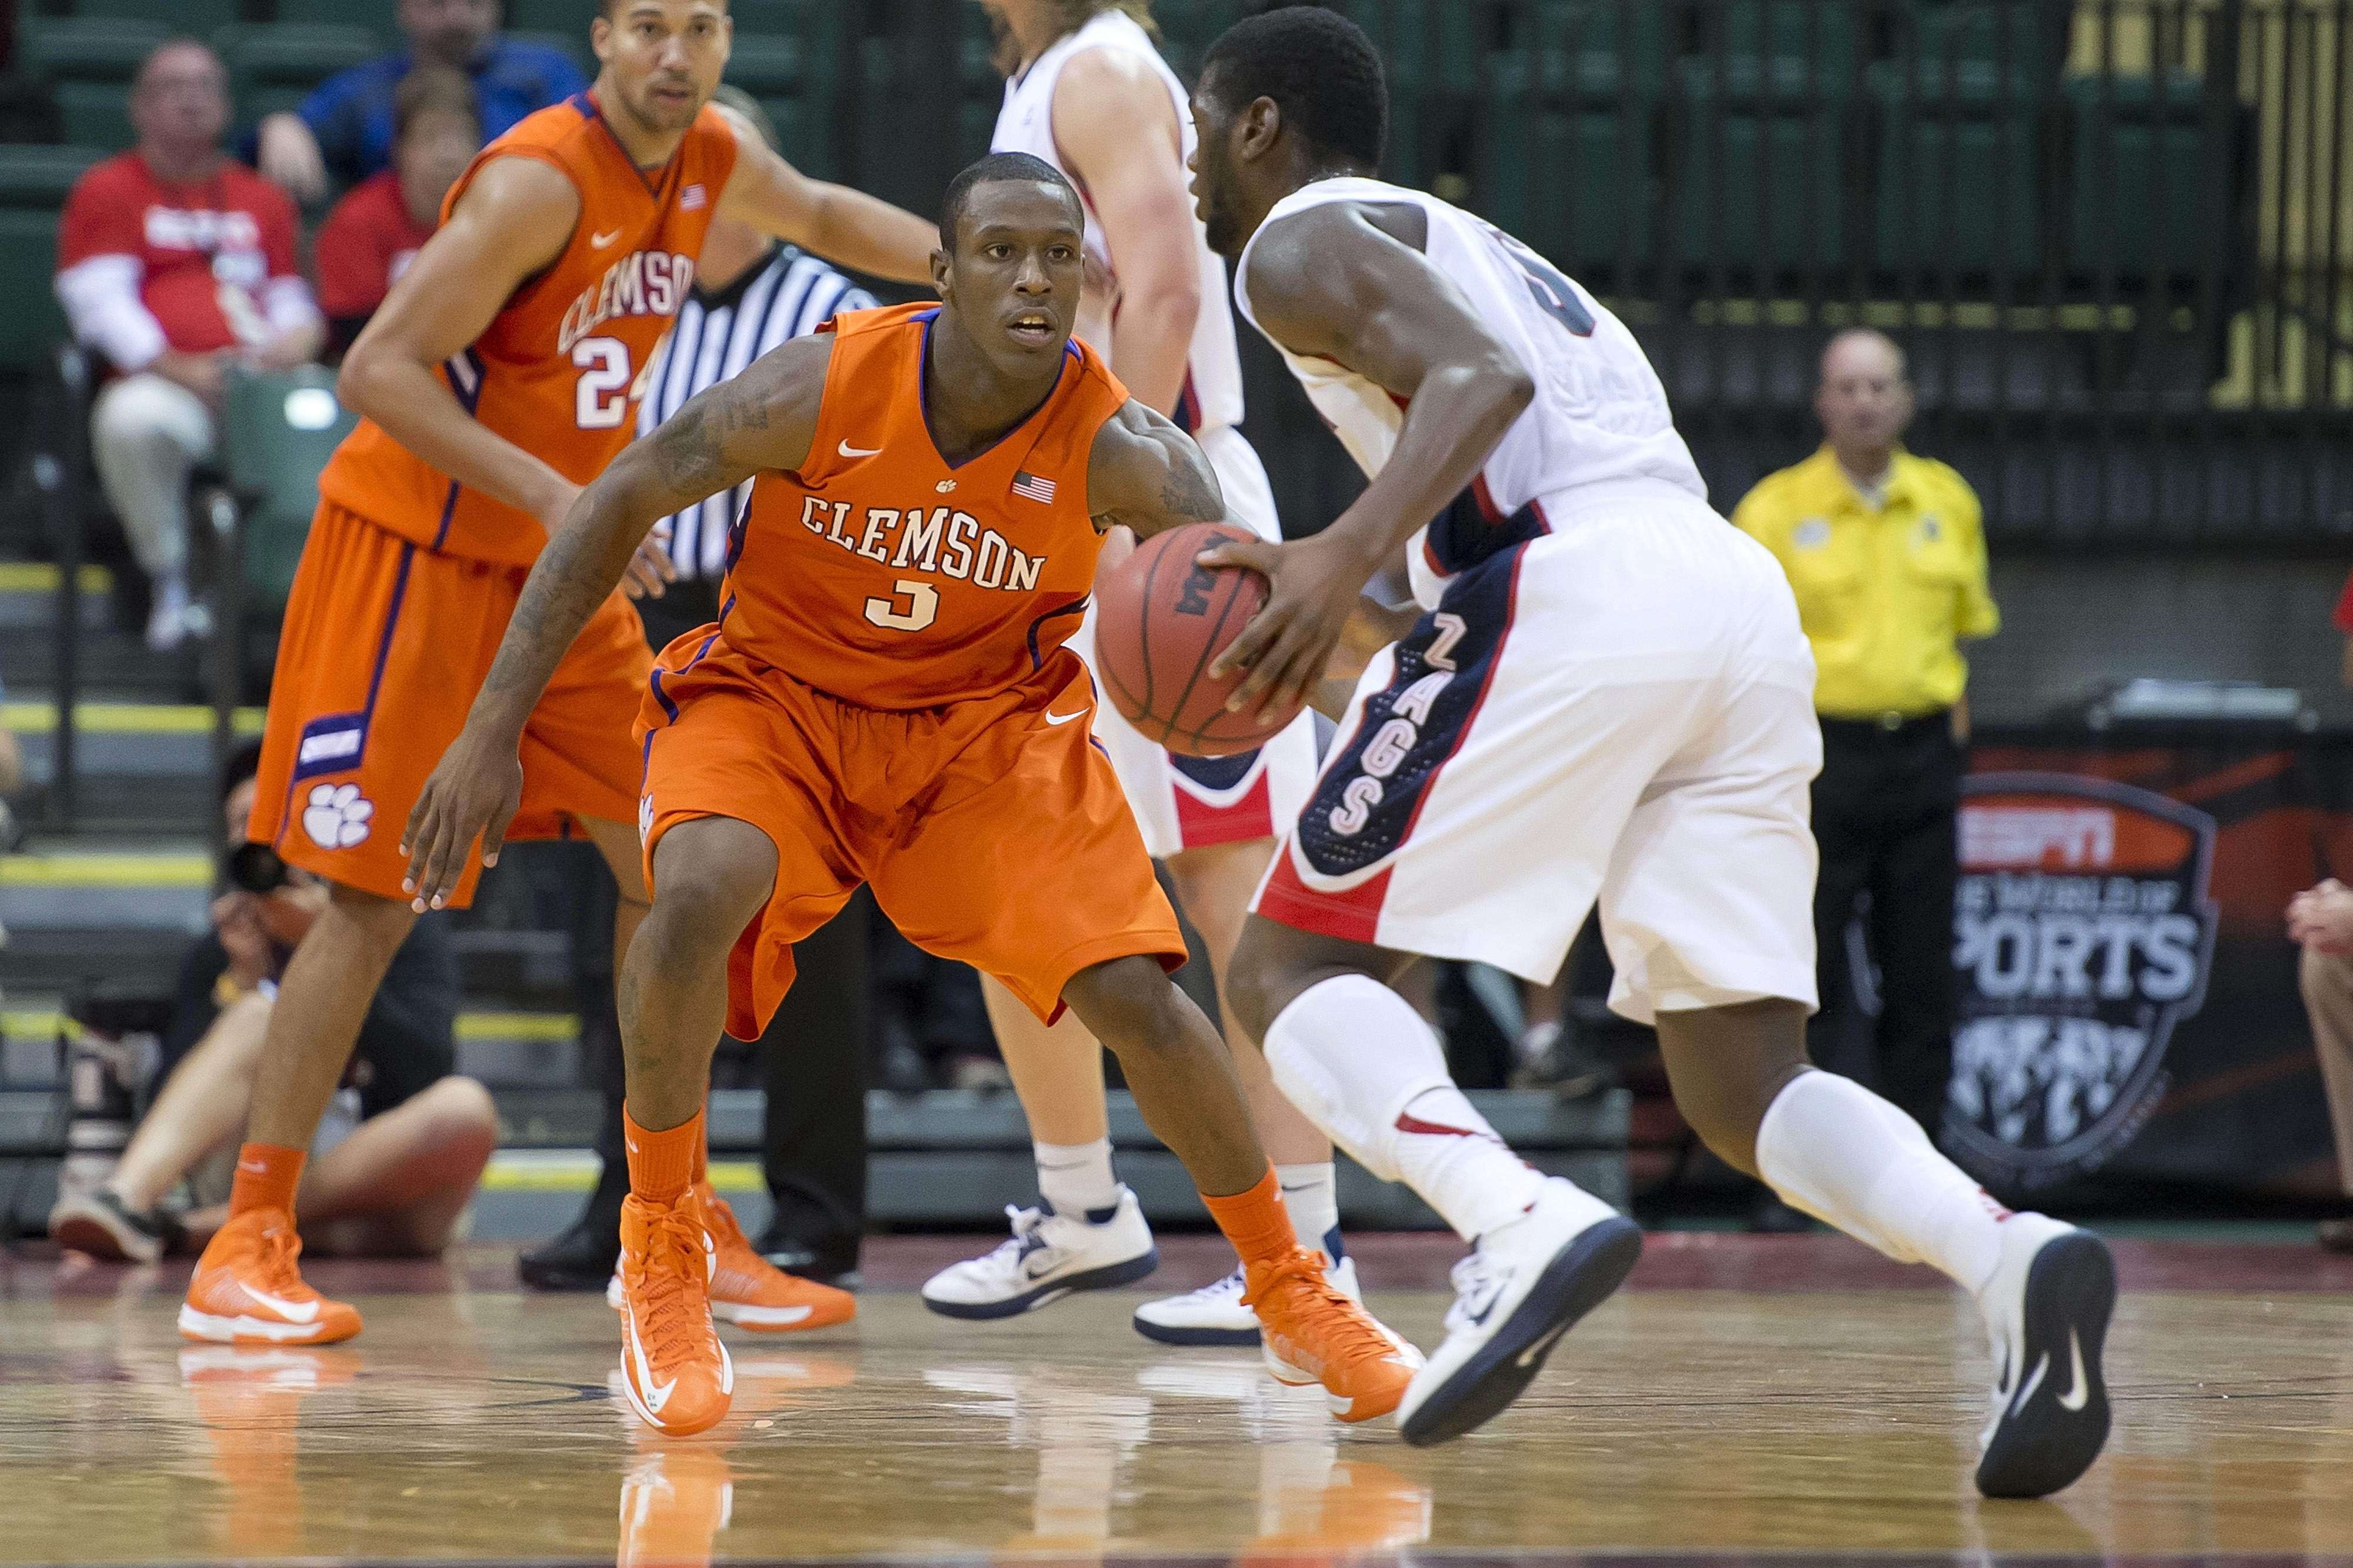 Valiant Clemson Effort Falls Short as No. 16/17 Gonzaga Prevails in Old Spice Classic, 57-49